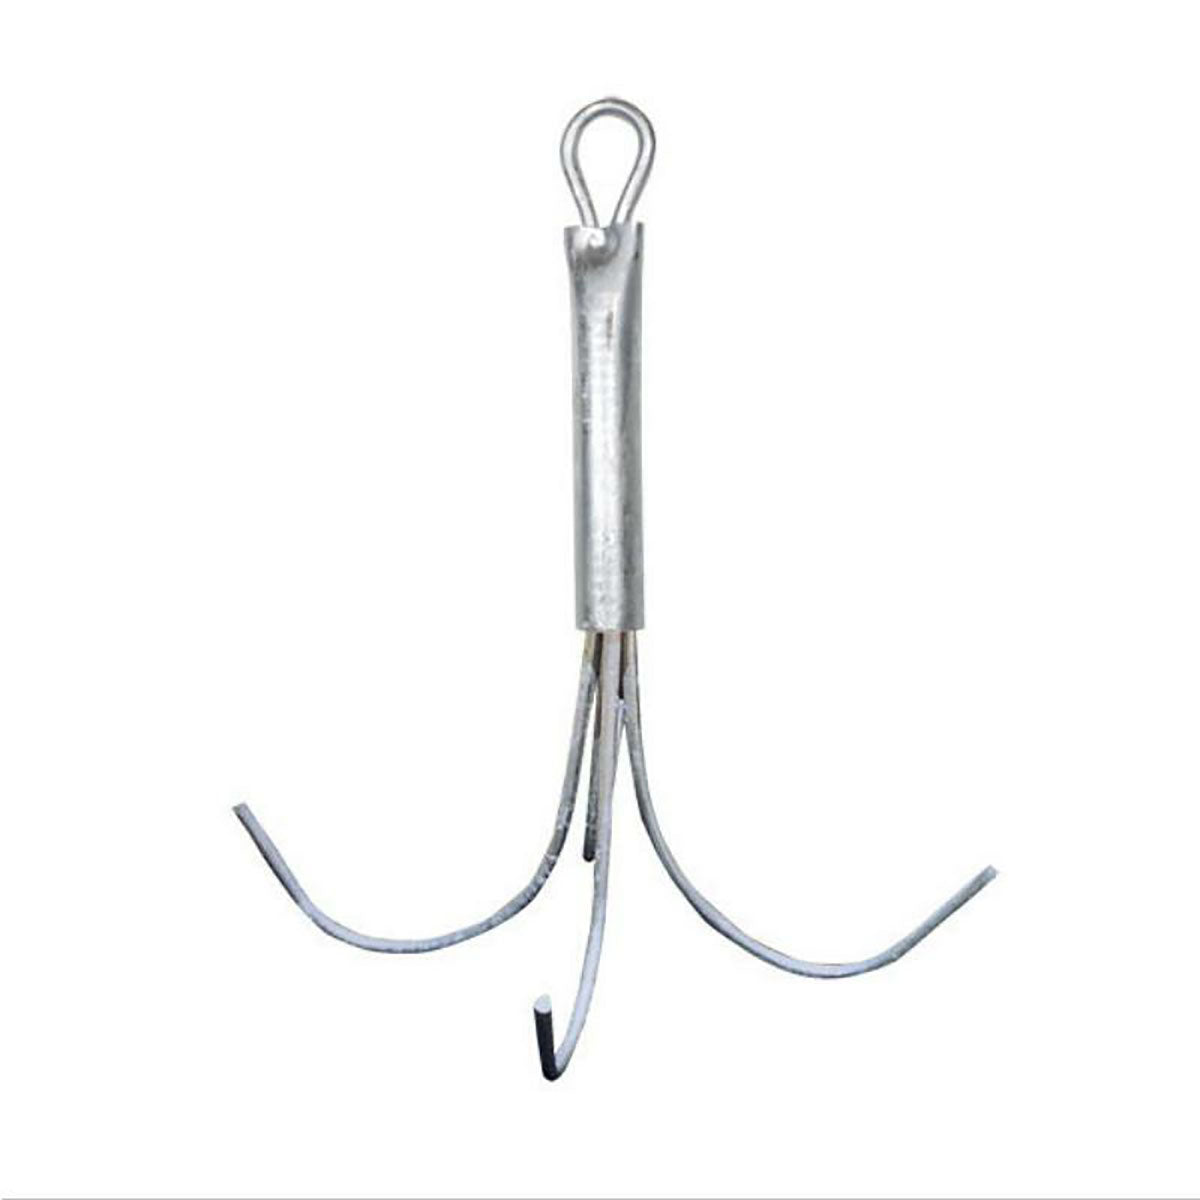 BLA Reef Anchor - Galvanised-Boating Accessories - Anchors-BLA-6mm 4 Prong (Suit 3m Boat)-Fishing Station